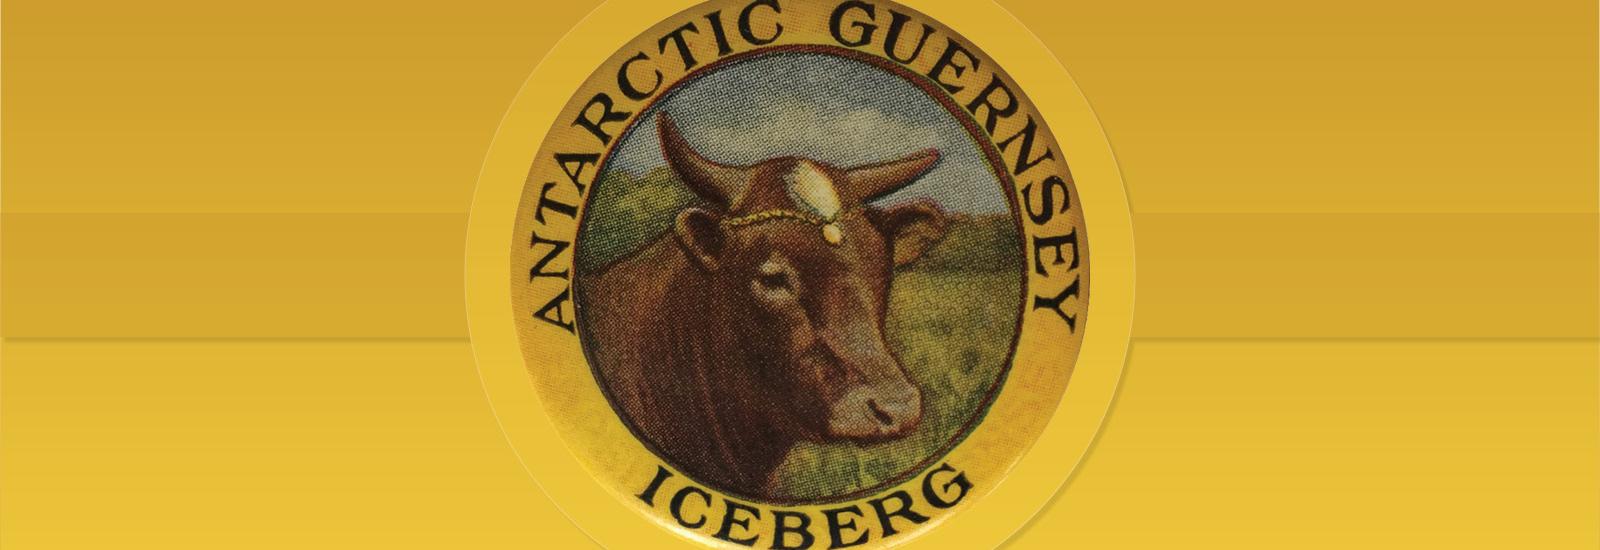 Drawing of a cow with the text "Antarctica Guernsey Iceberg"